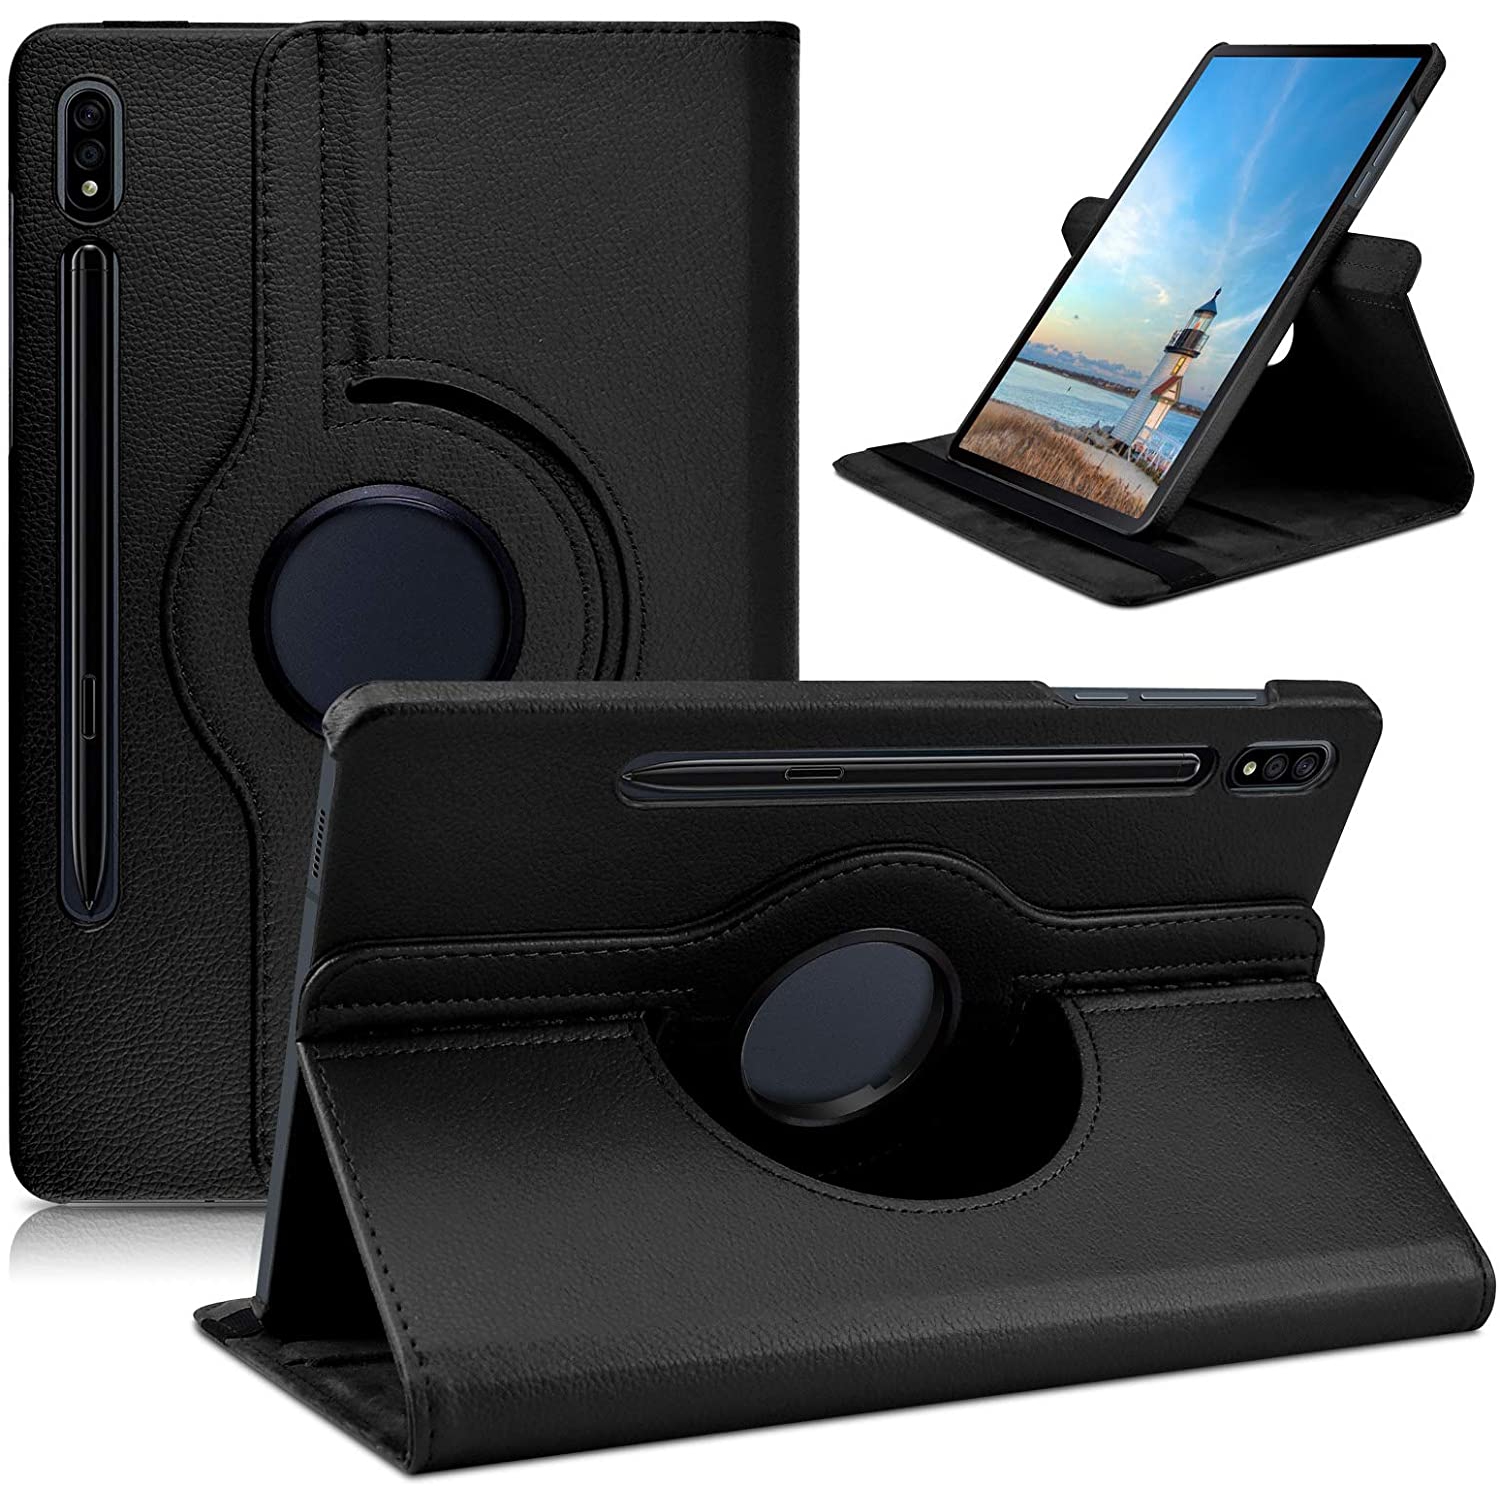 For Samsung Galaxy Tab A10.1 SM-T510/T515 Black Leather Smart 360 Rotate Flip Stand Case Cove